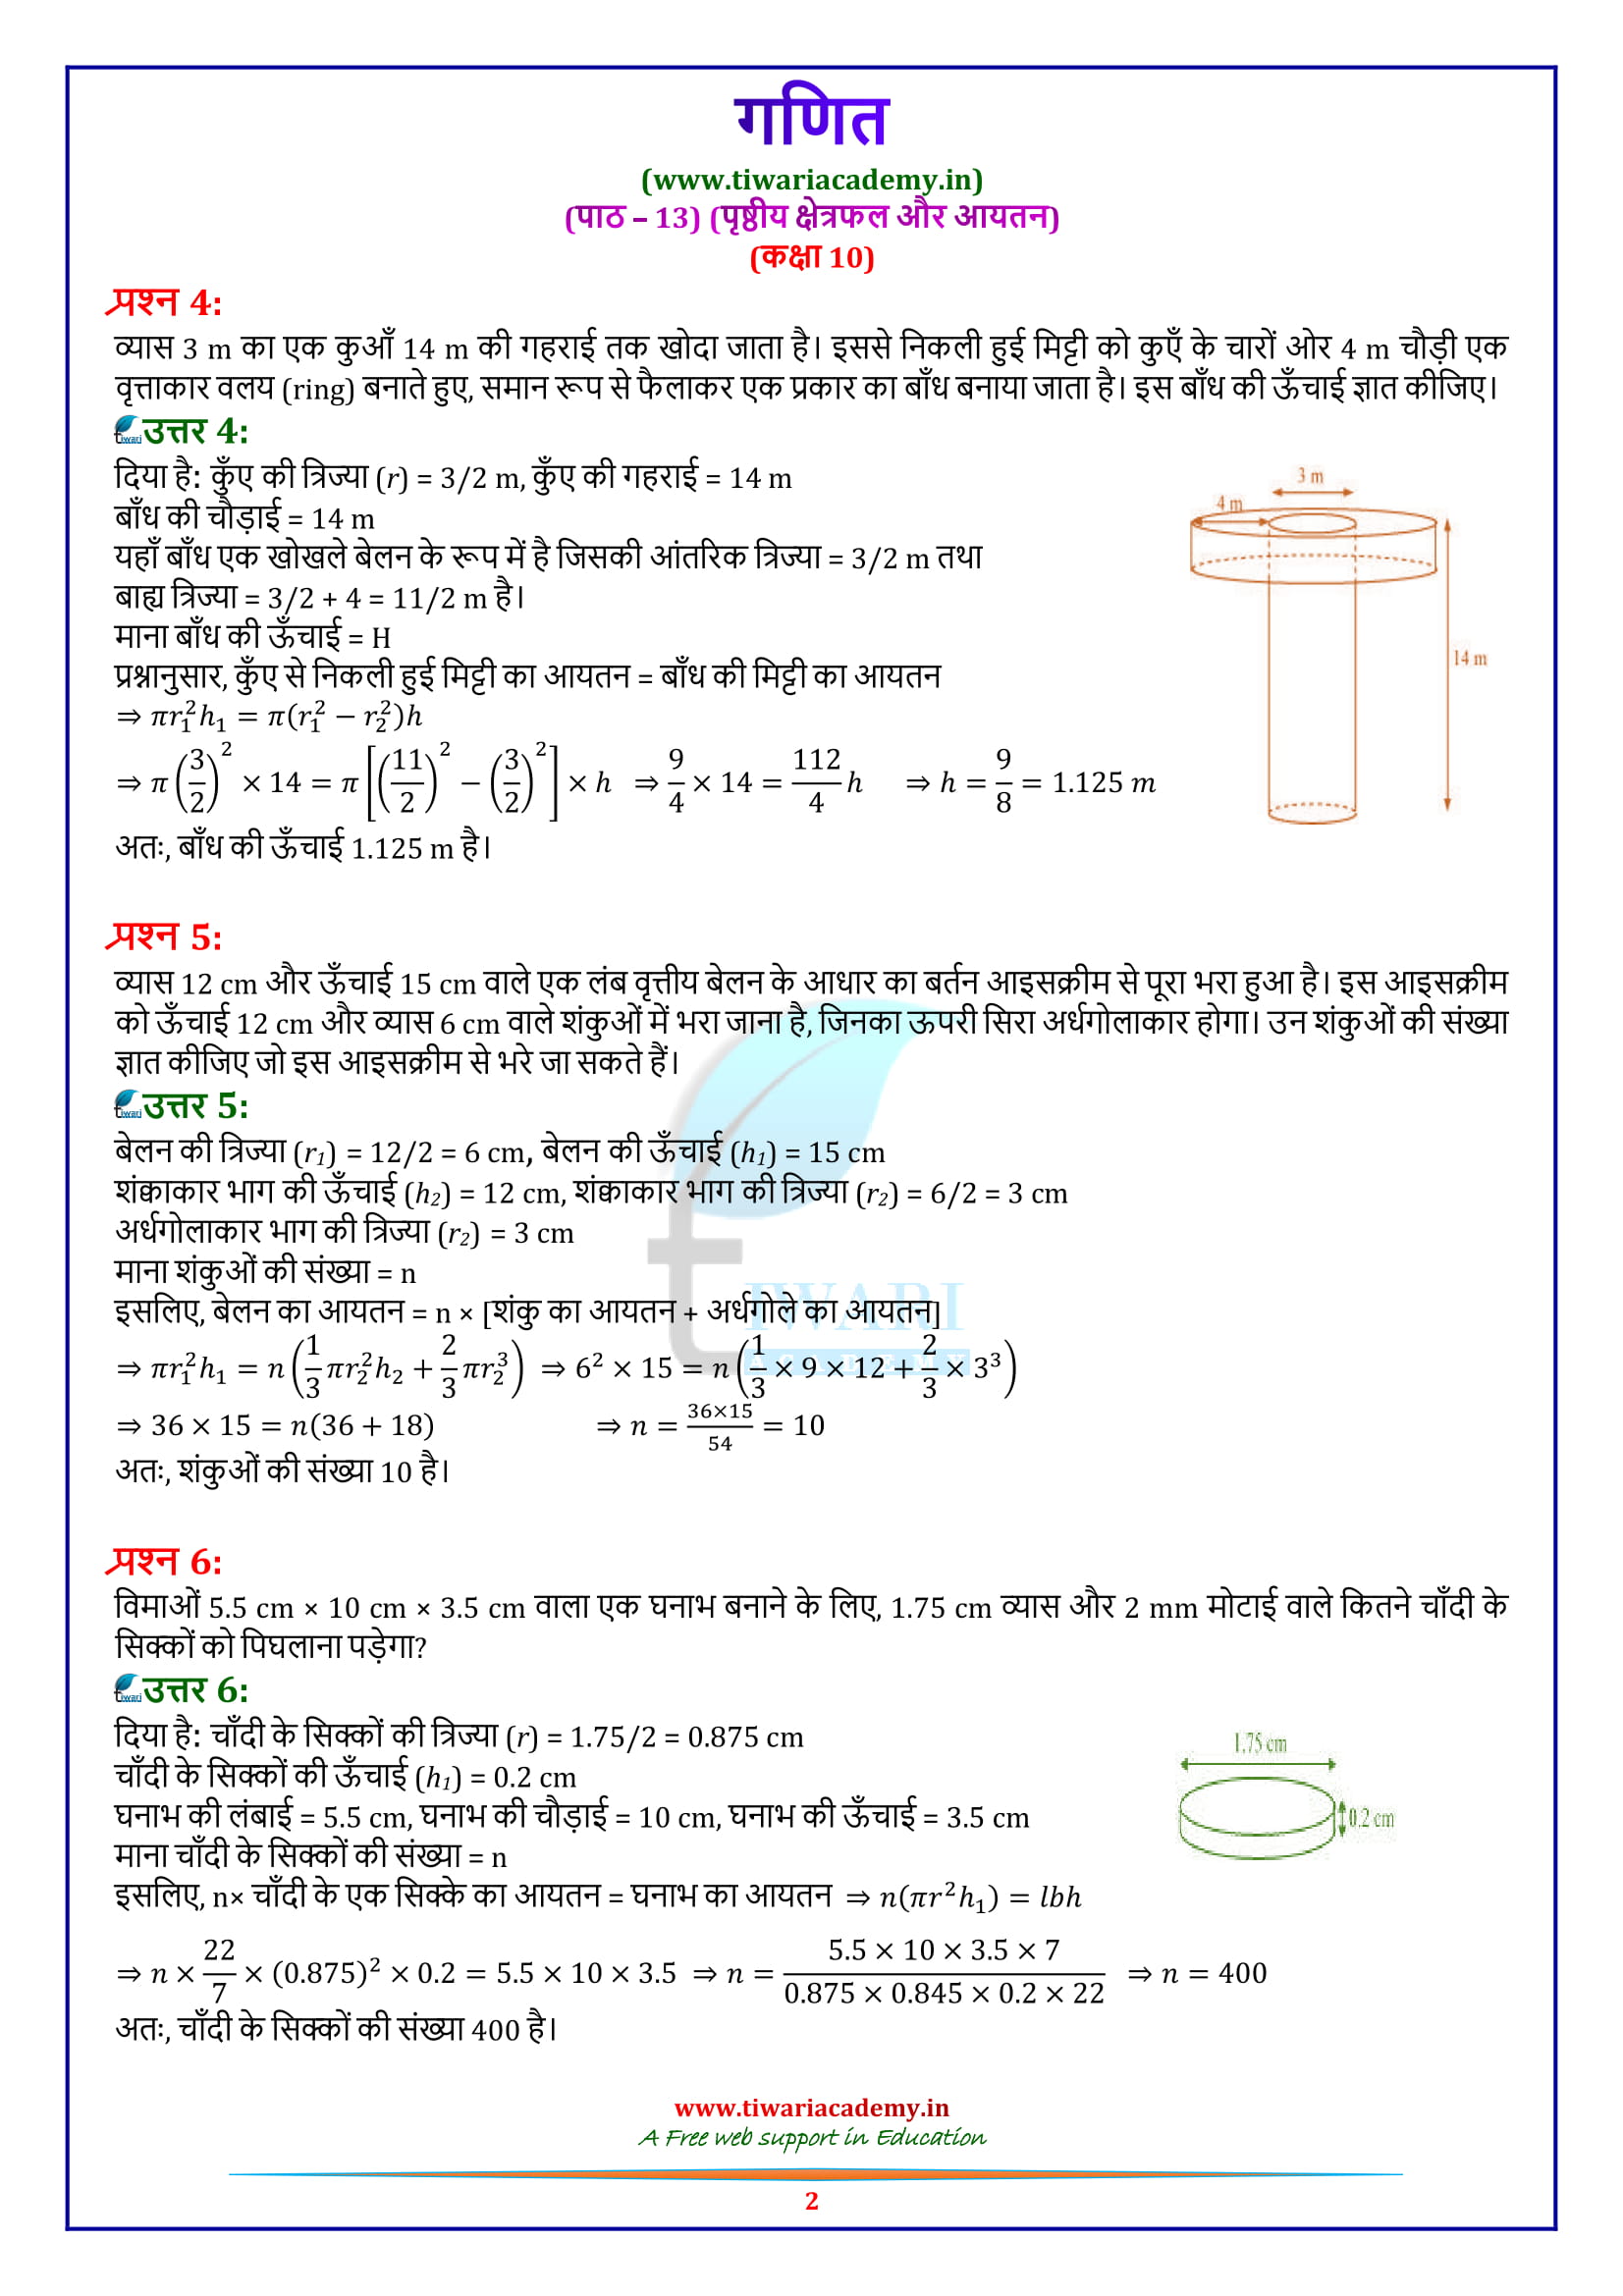 Class 10 Maths Exercise 13.3 solutions updated for 2020 – 2021